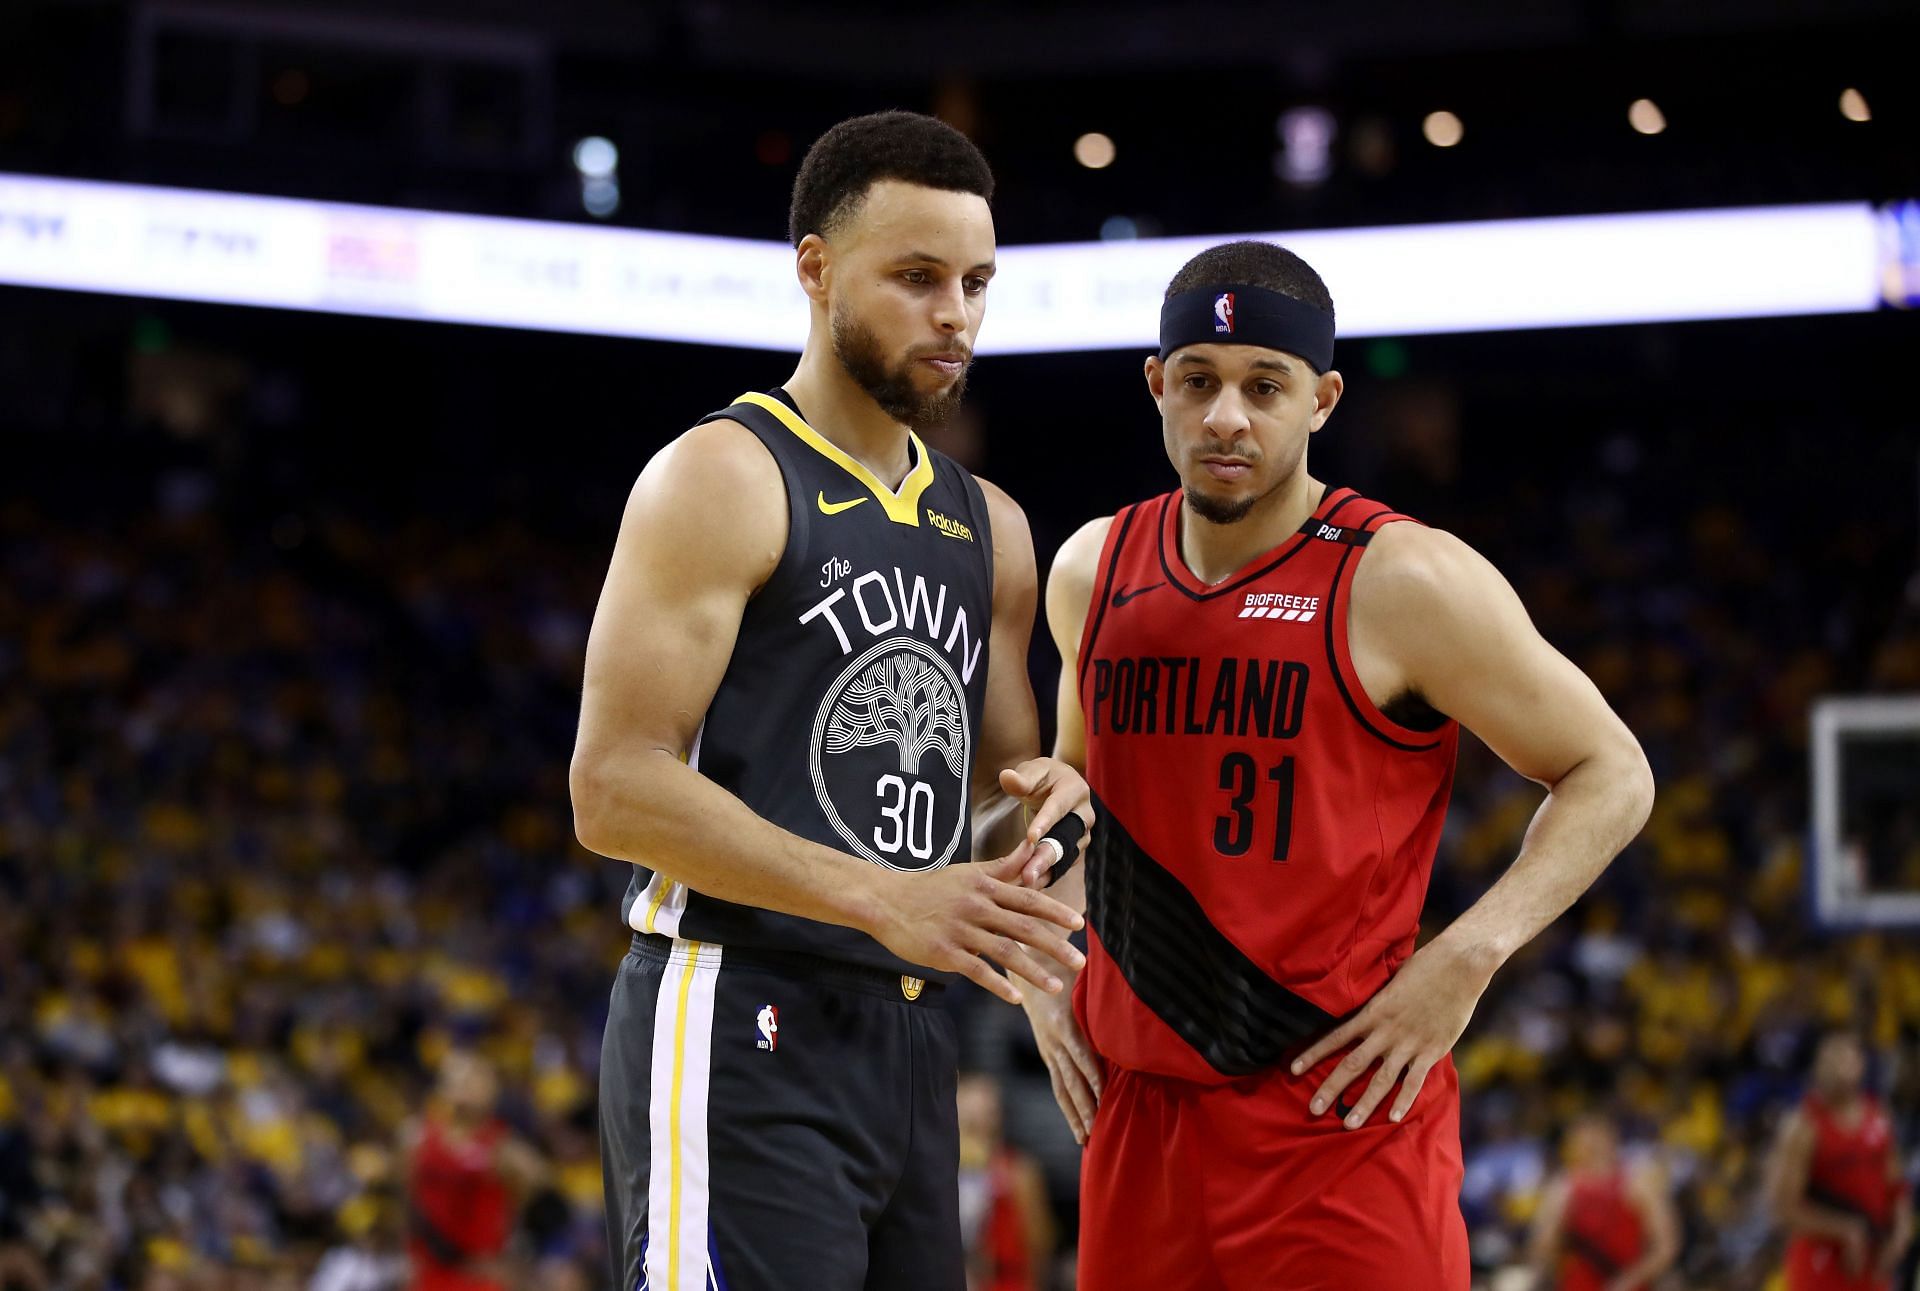 Seth Curry #31 of the Portland Trail Blazers is guarded by Stephen Curry #30 of the Golden State Warriors during Game Two of the Western Conference Finals of the NBA Playoffs at ORACLE Arena on May 16, 2019 in Oakland, California.